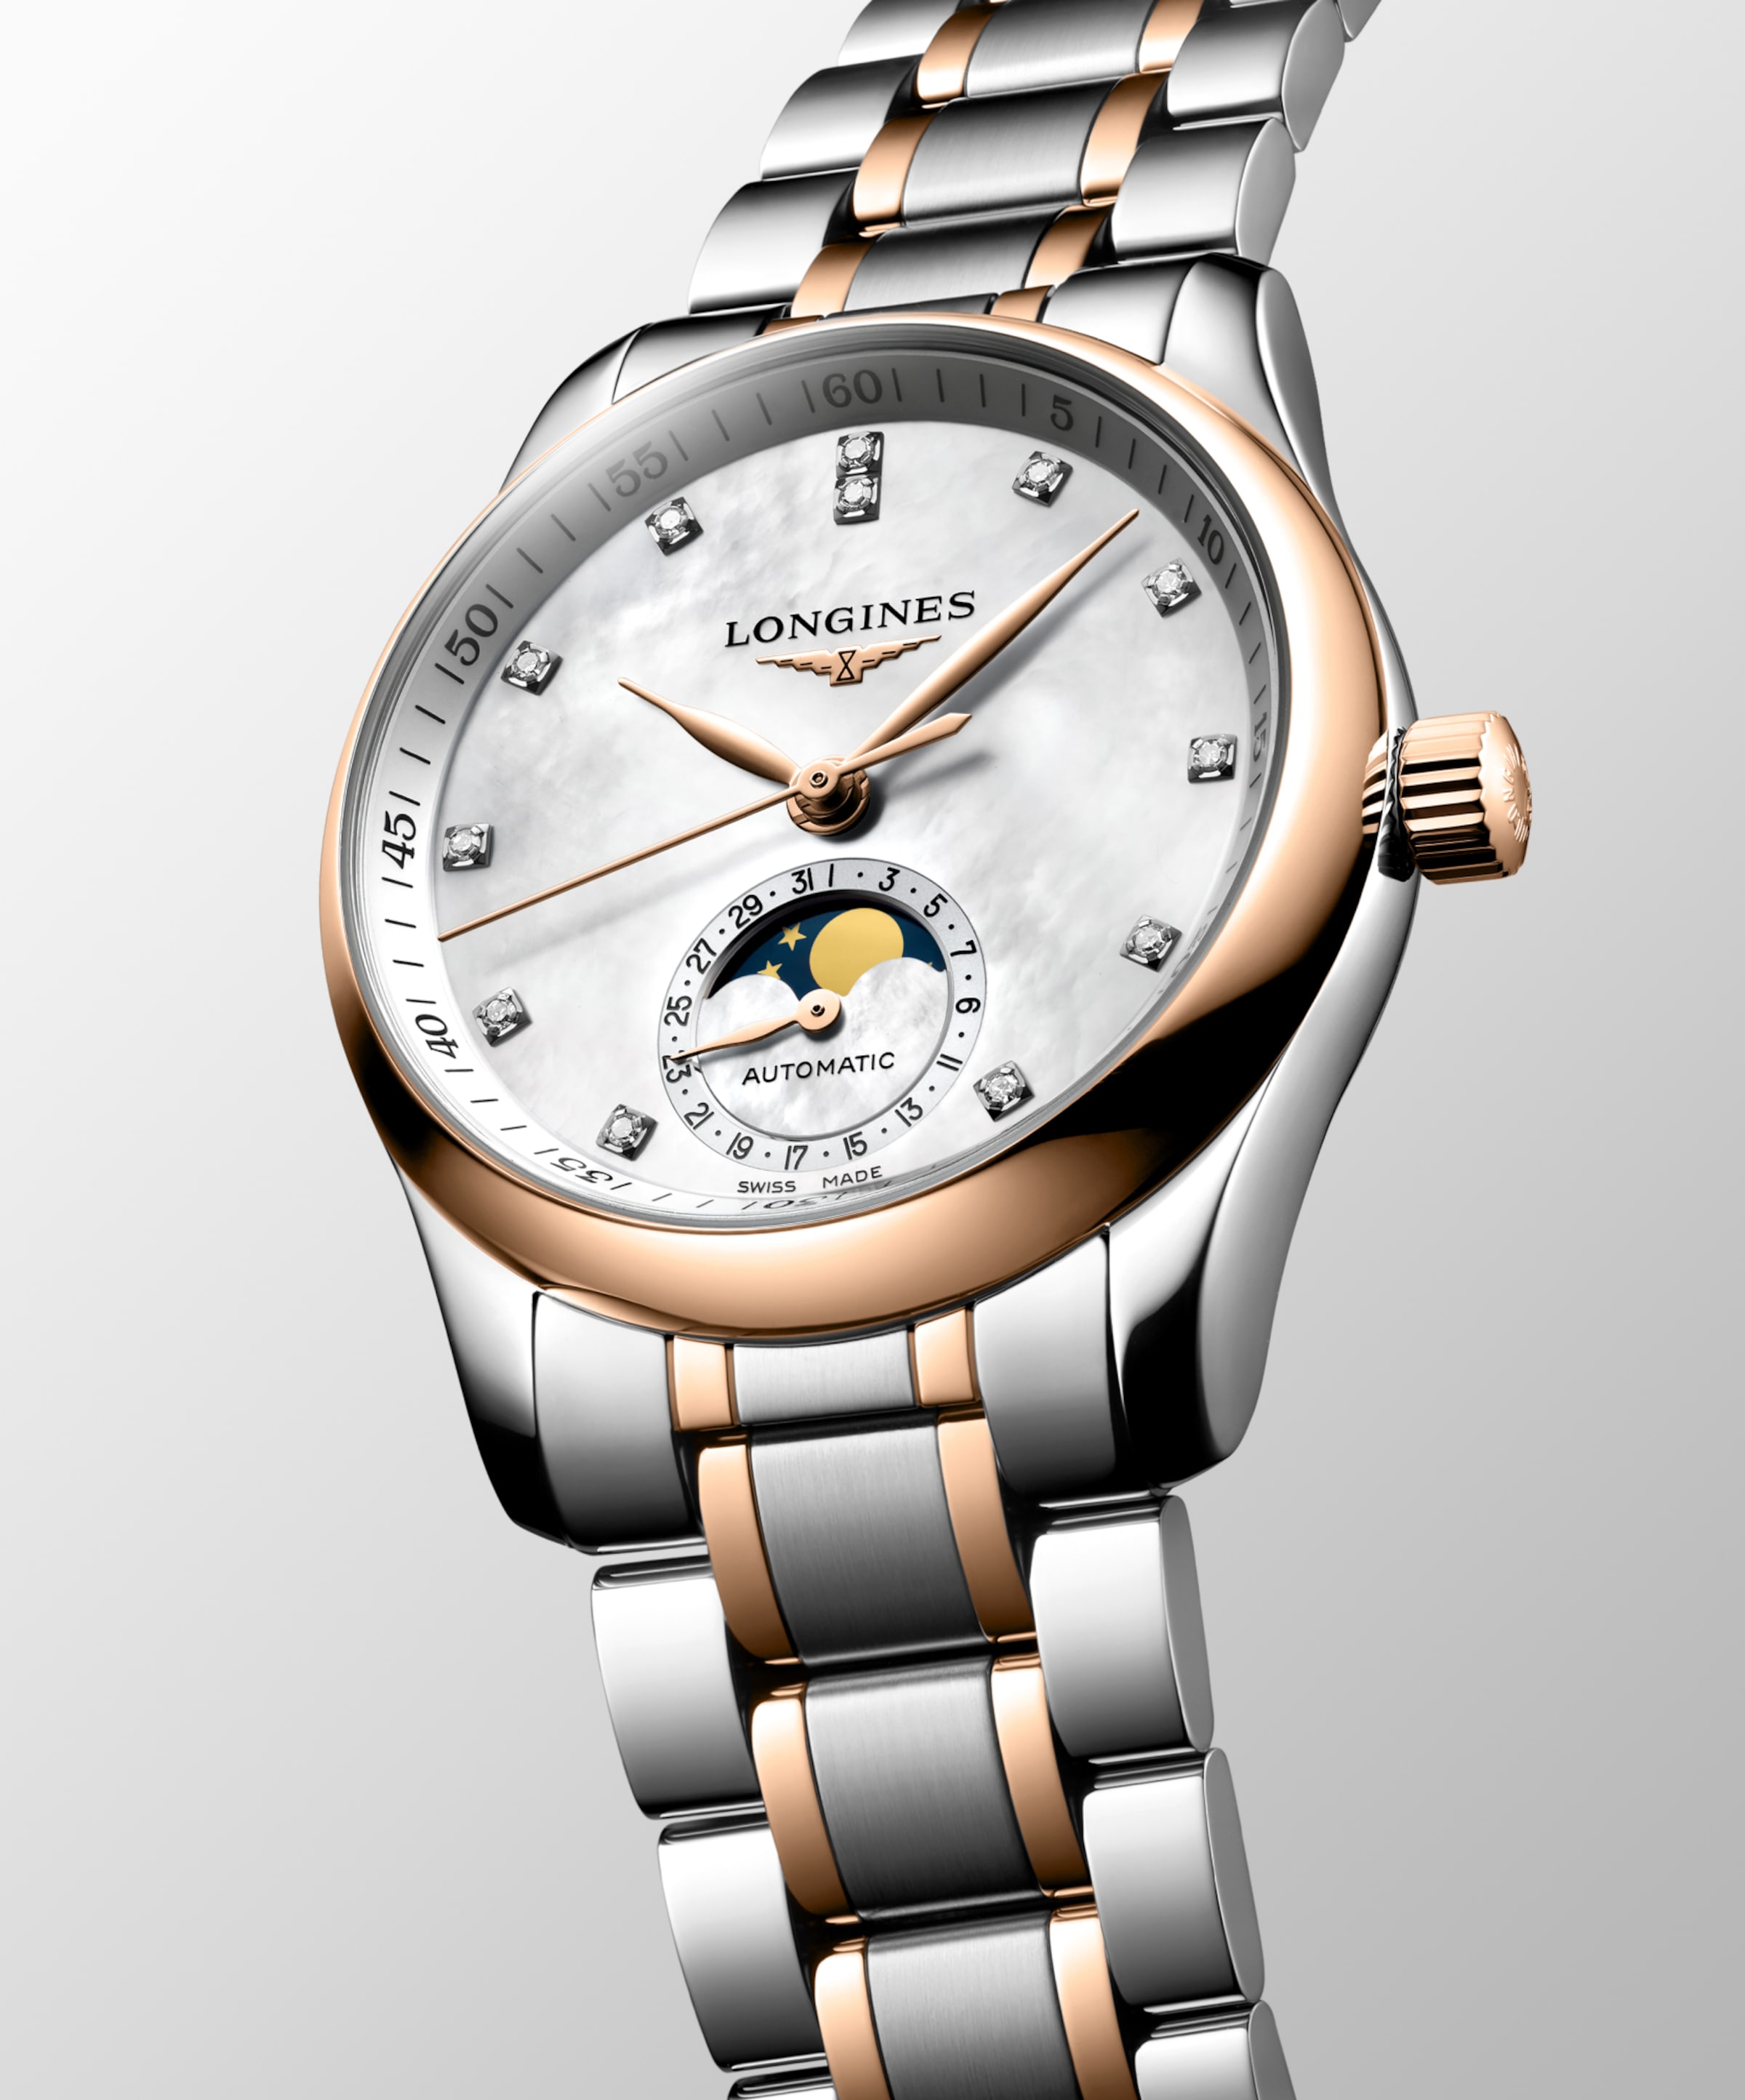 Longines MASTER COLLECTION Automatic Stainless steel and 18 karat pink gold cap 200 Watch - L2.409.5.89.7